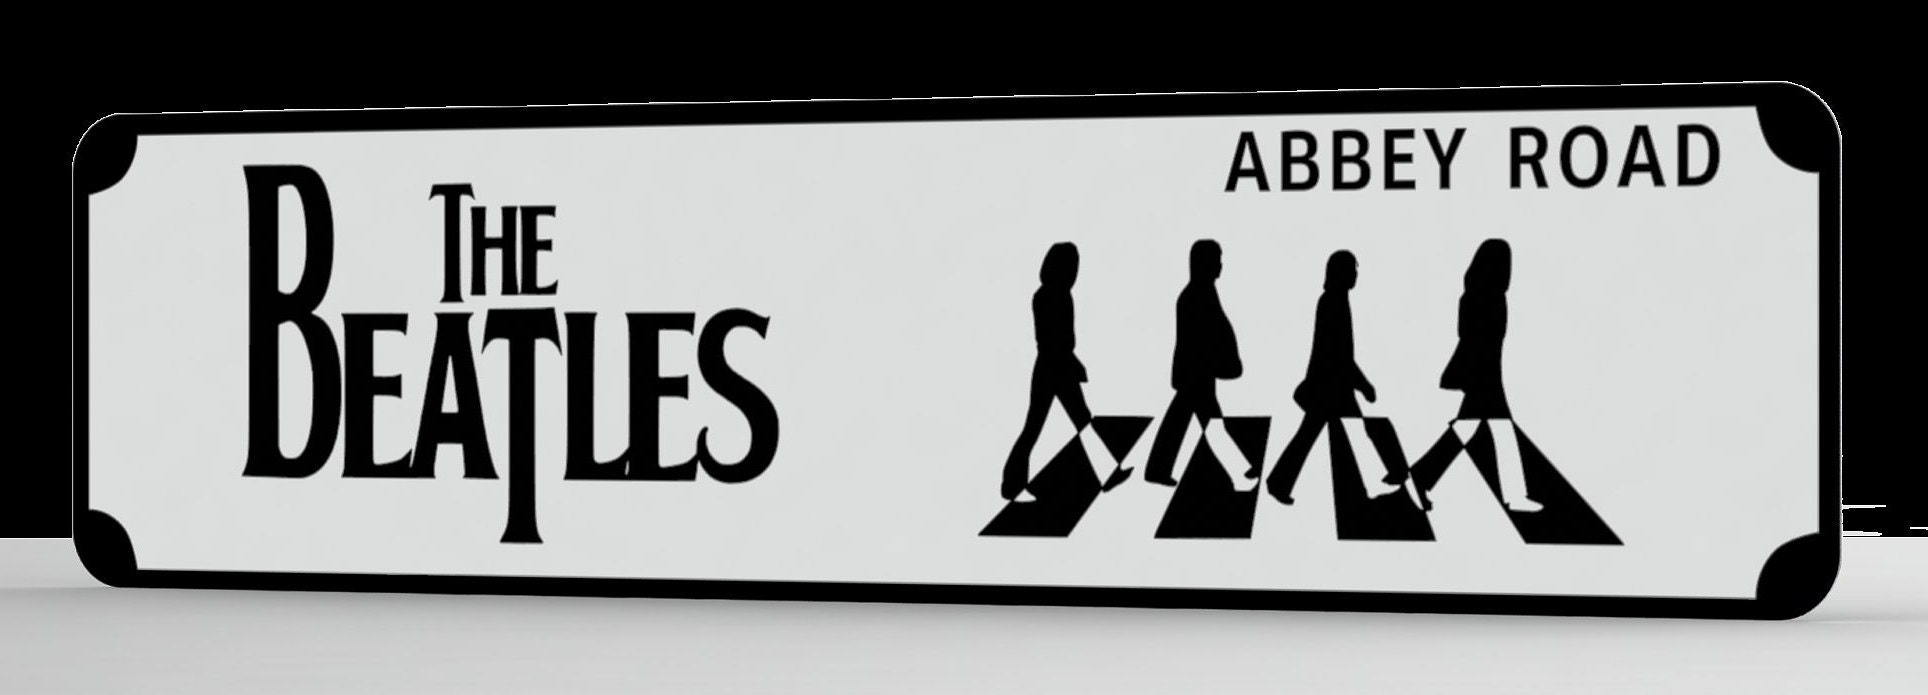 The Beatles Street Sign 6 X 24 Man Cave - Etsy